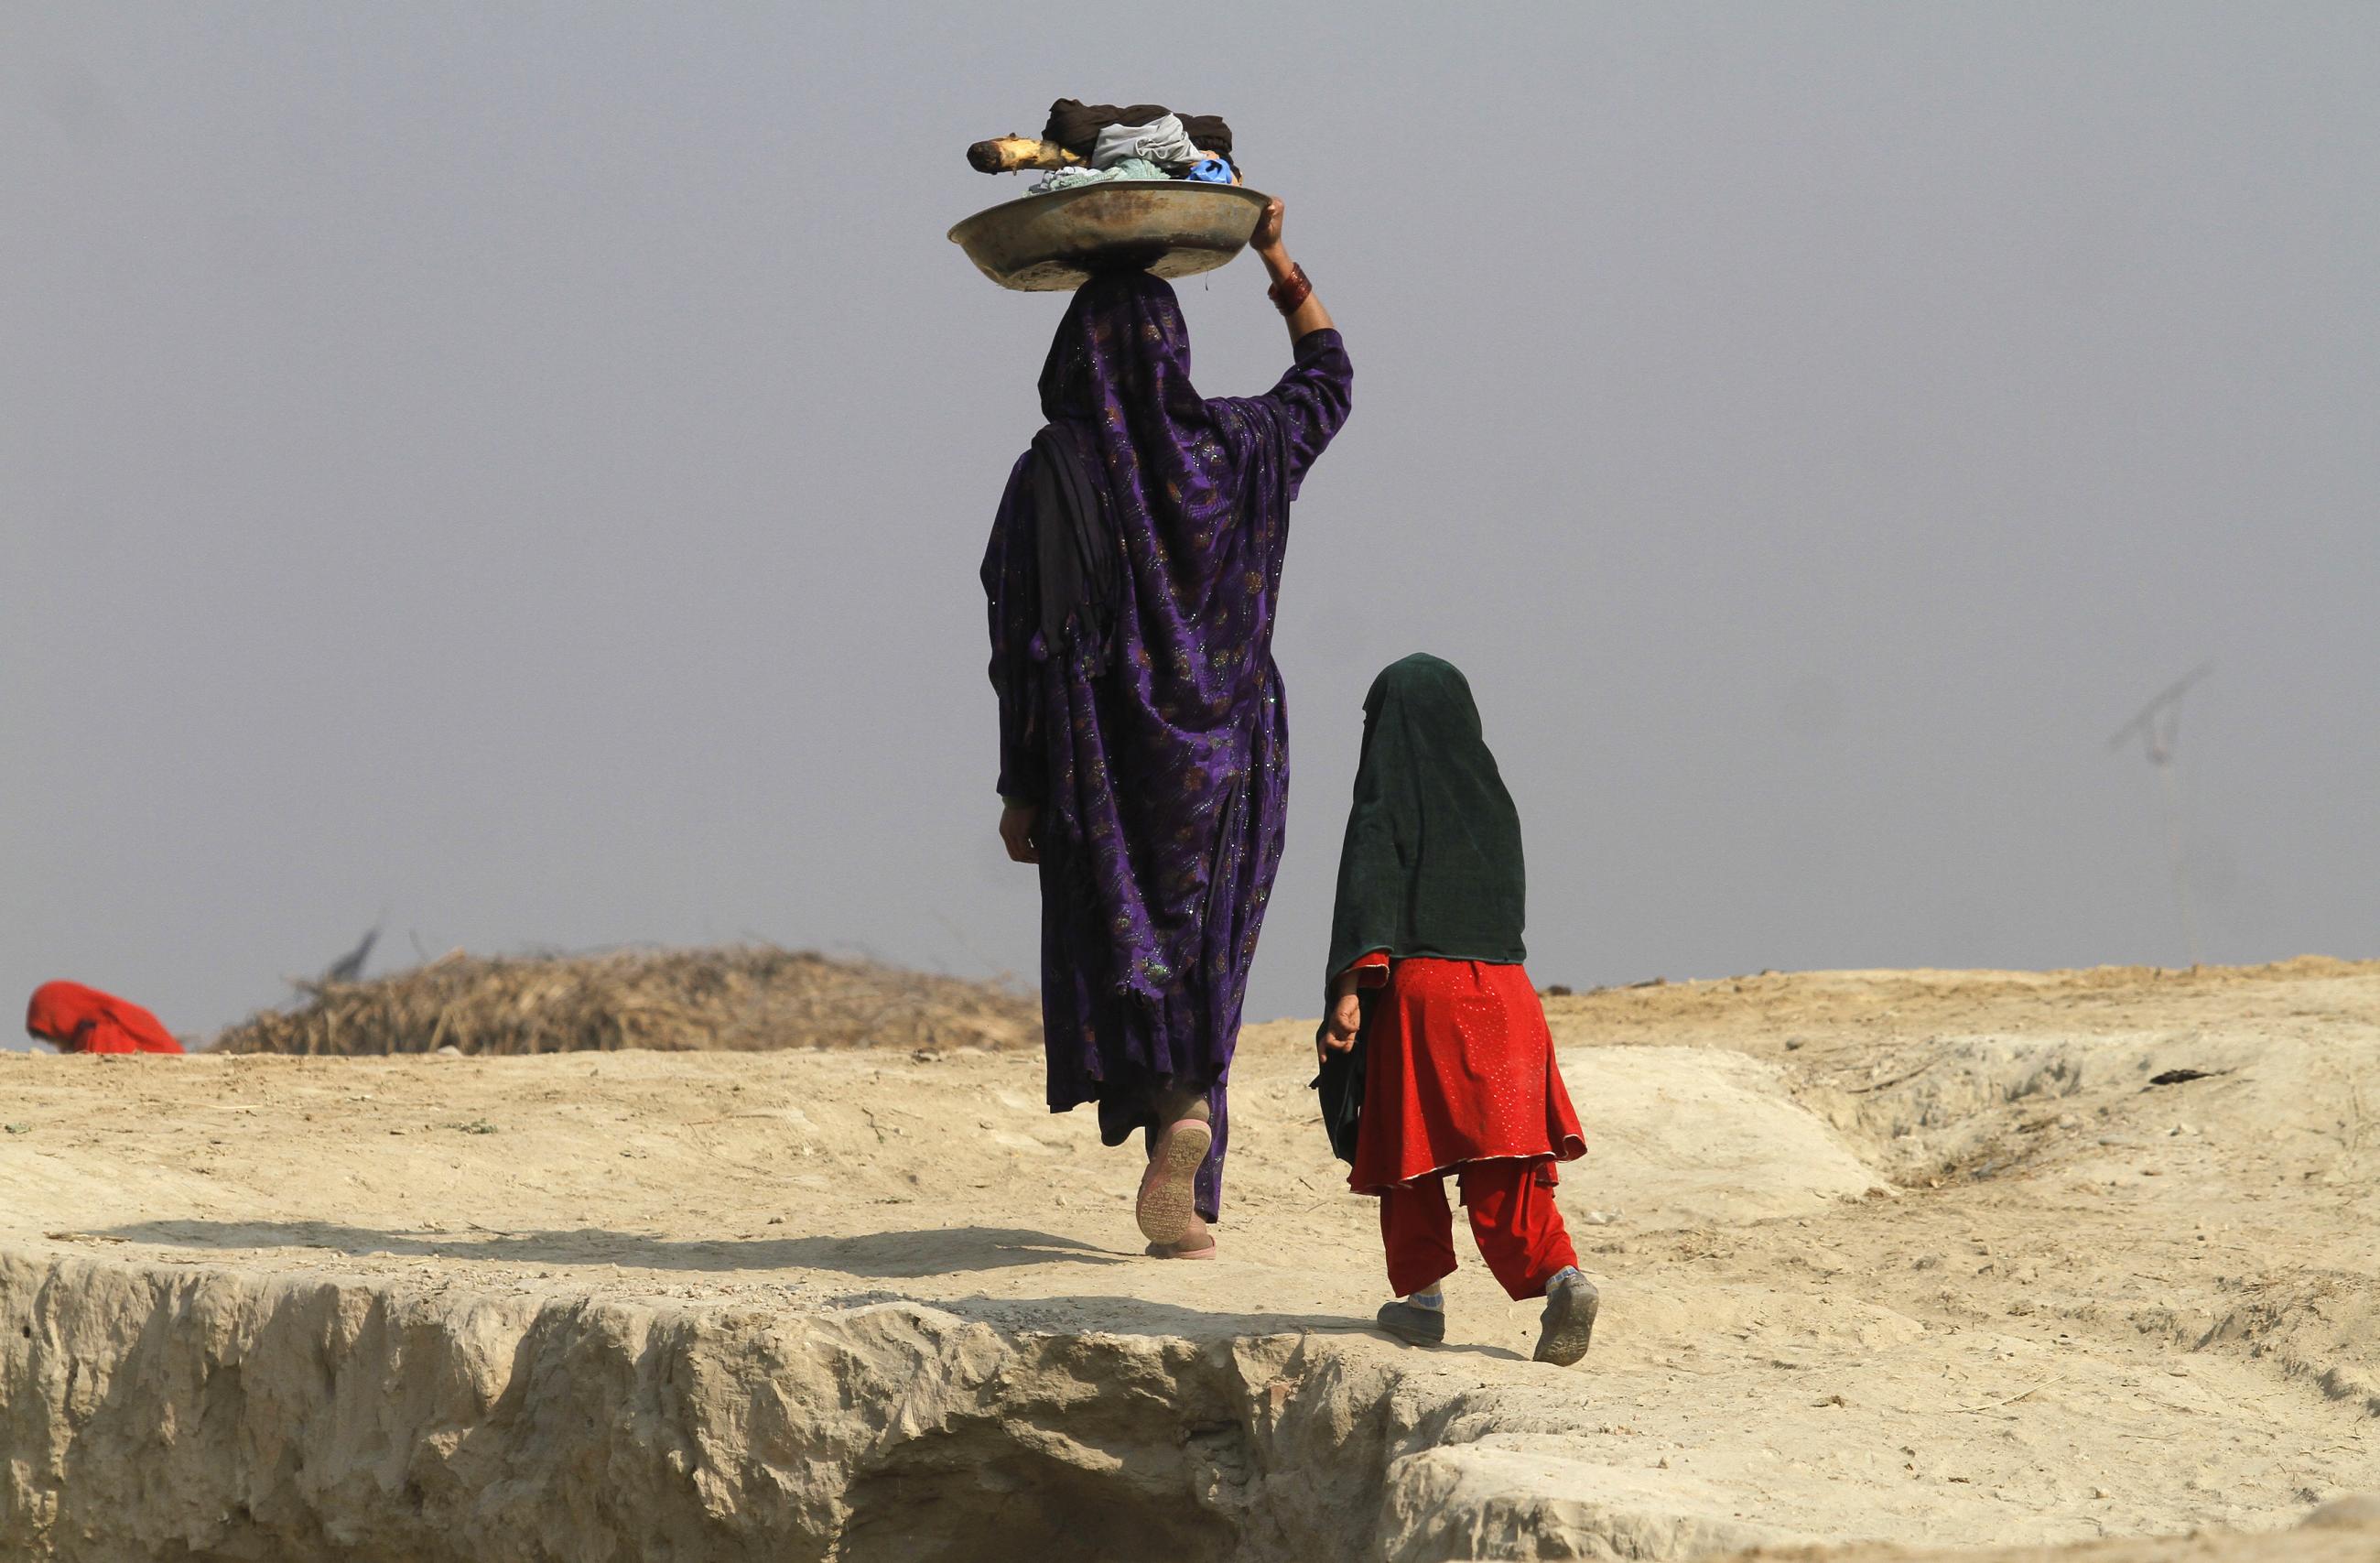 A woman walking alongside her child carries laundry on her head